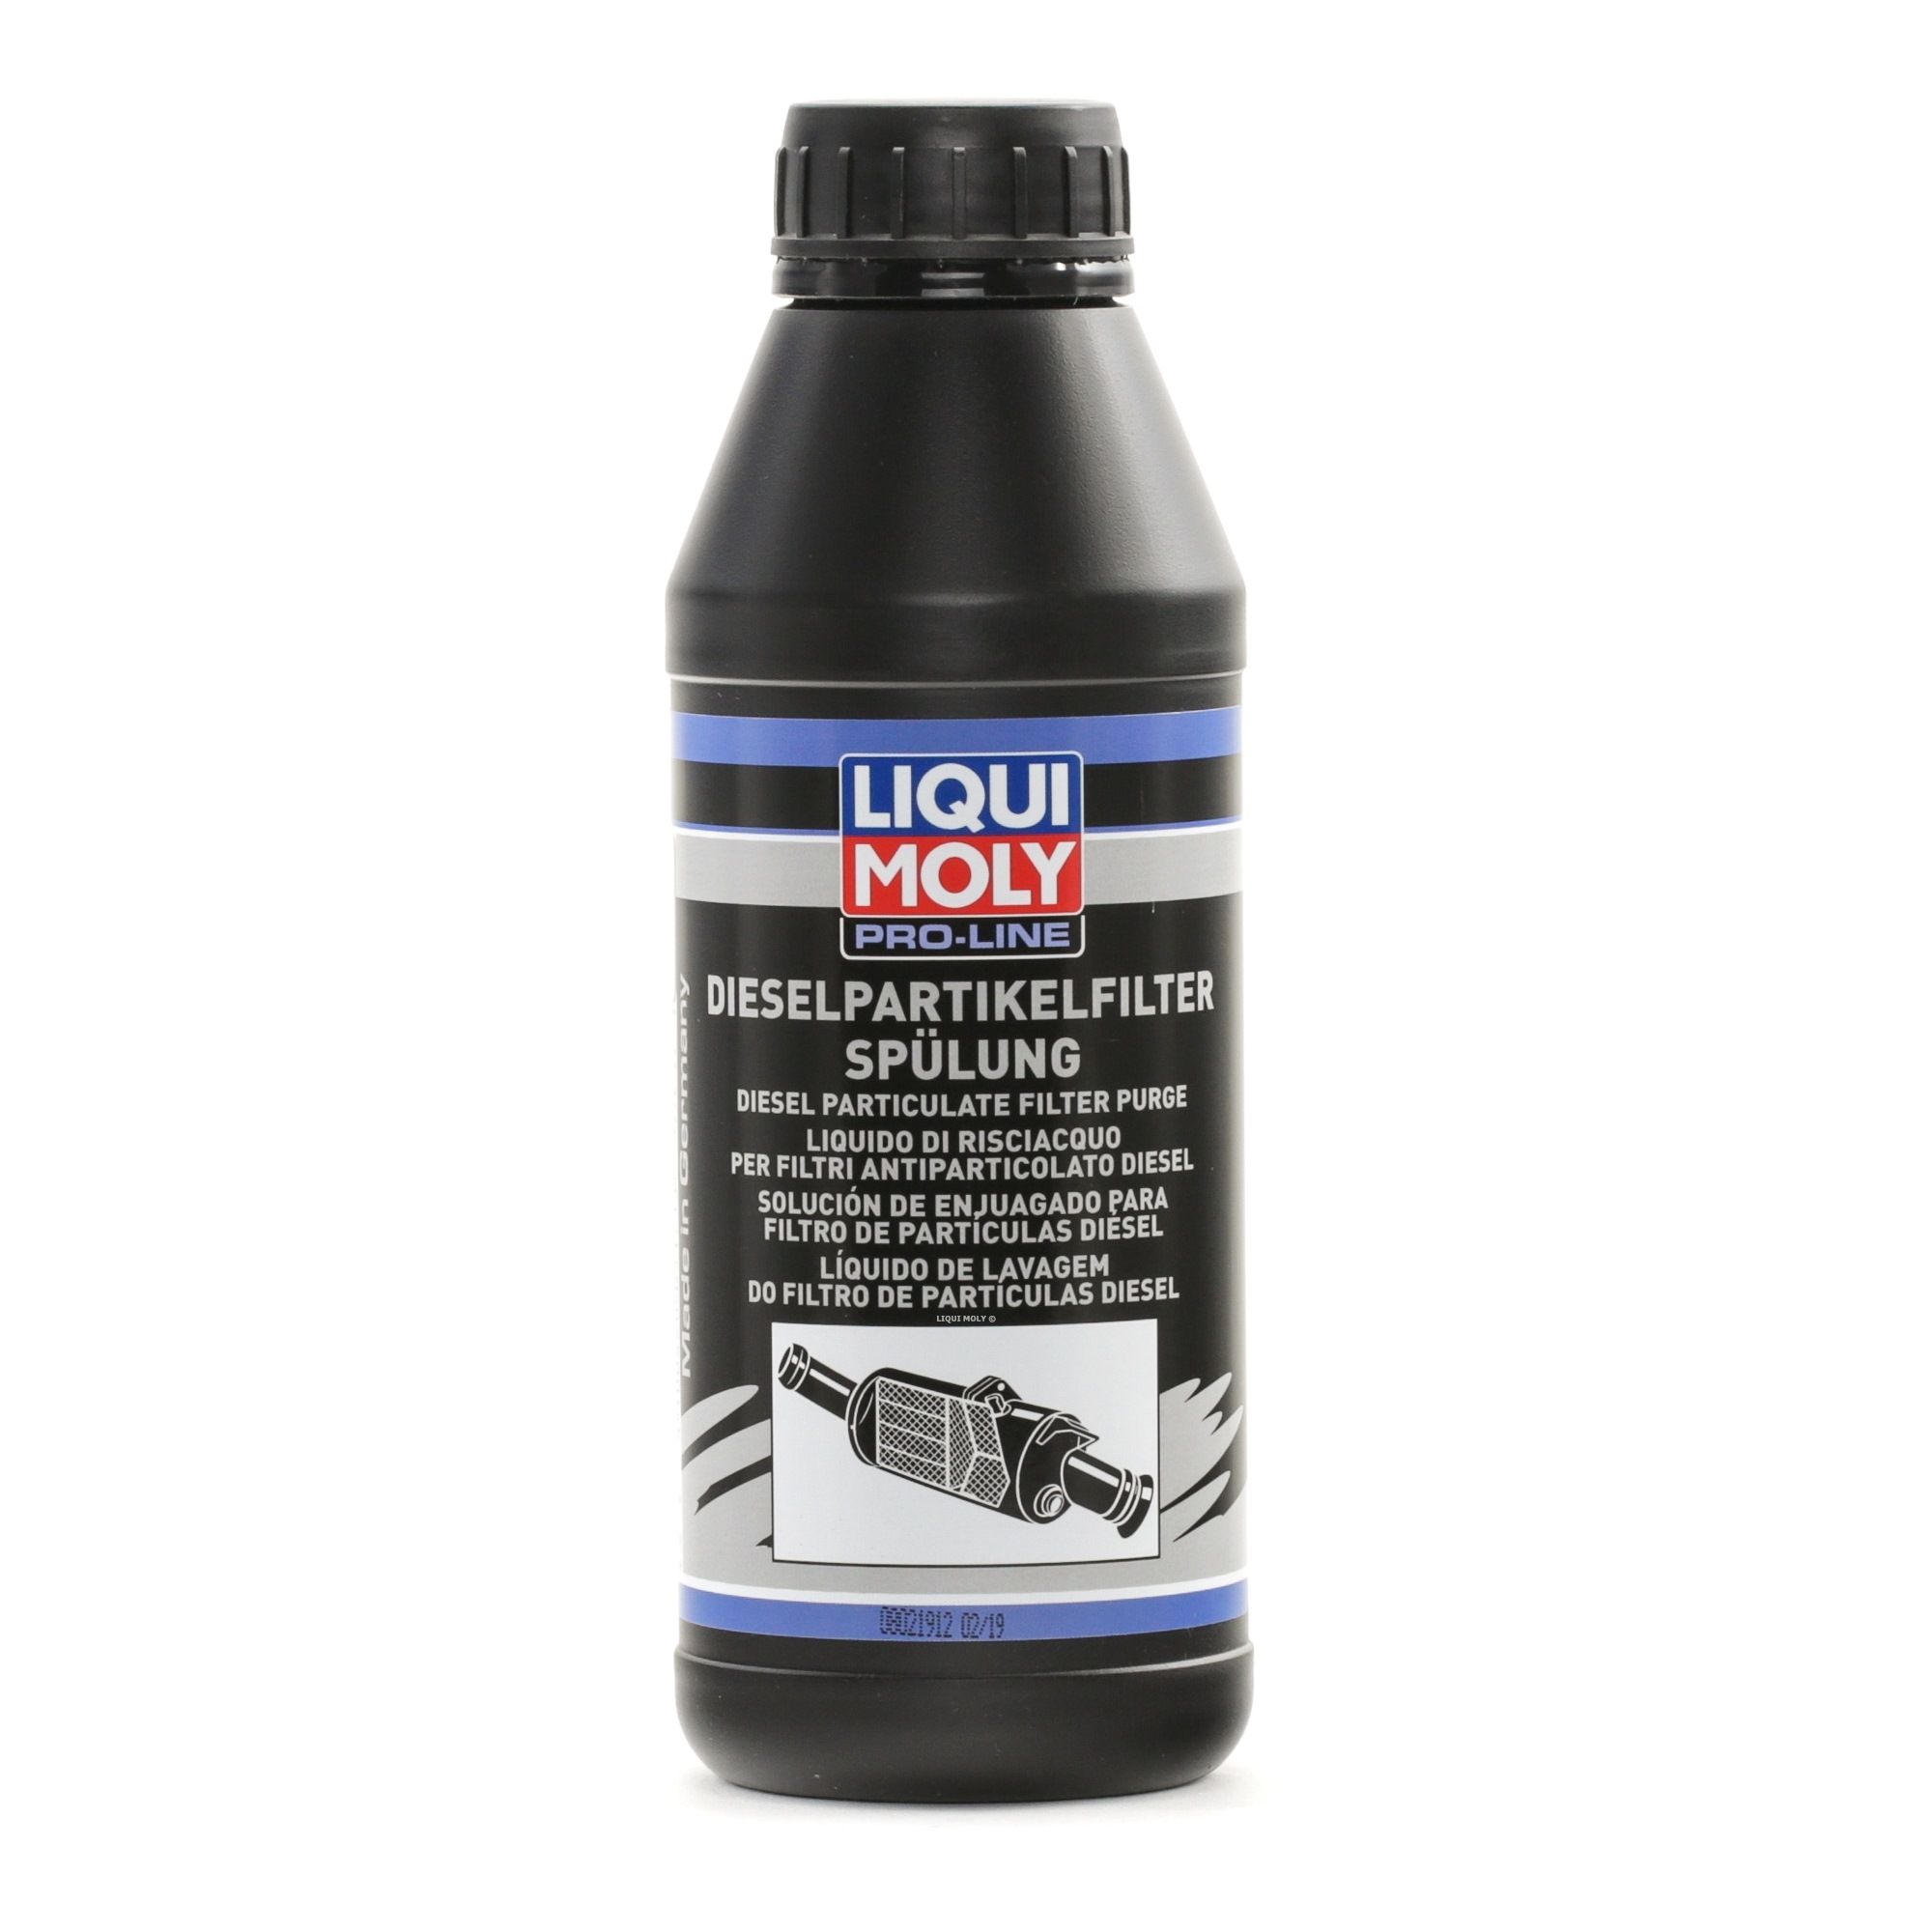 Oils and fluids parts - Soot / Particulate Filter Cleaning LIQUI MOLY 5171